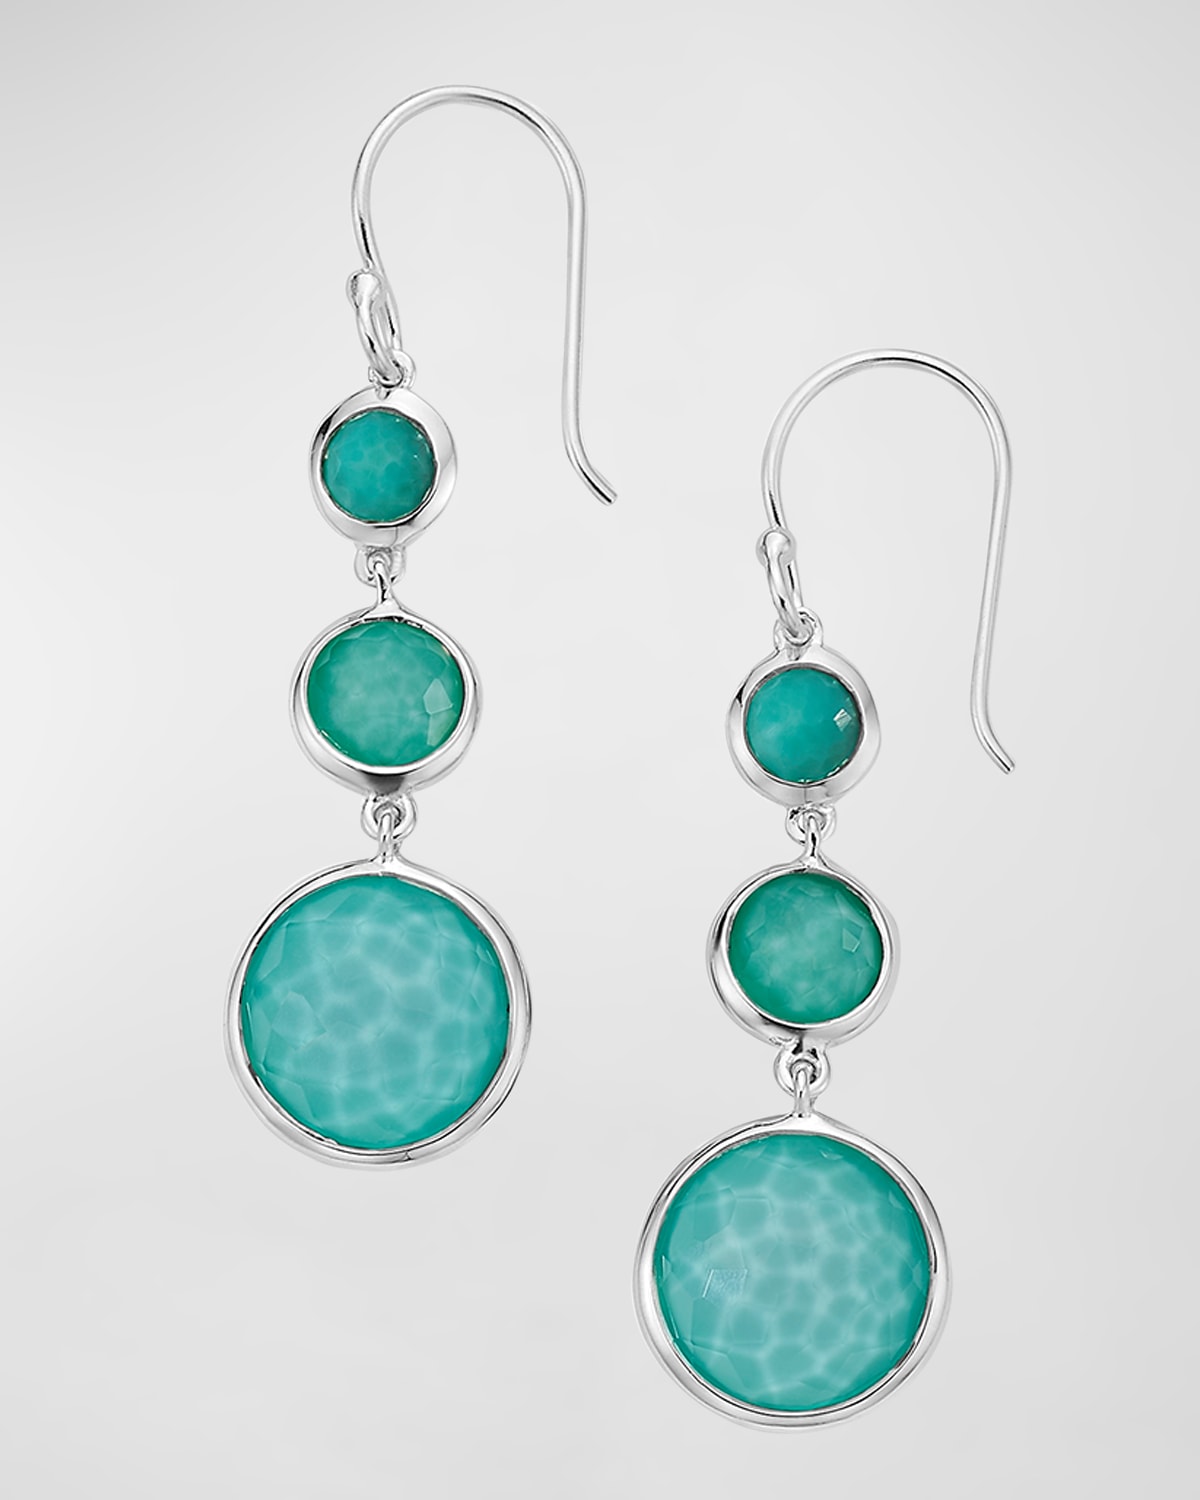 Ippolita Lollipop Lollitini 3-stone Drop Earrings In Sterling Silver With Turquoise Doublet